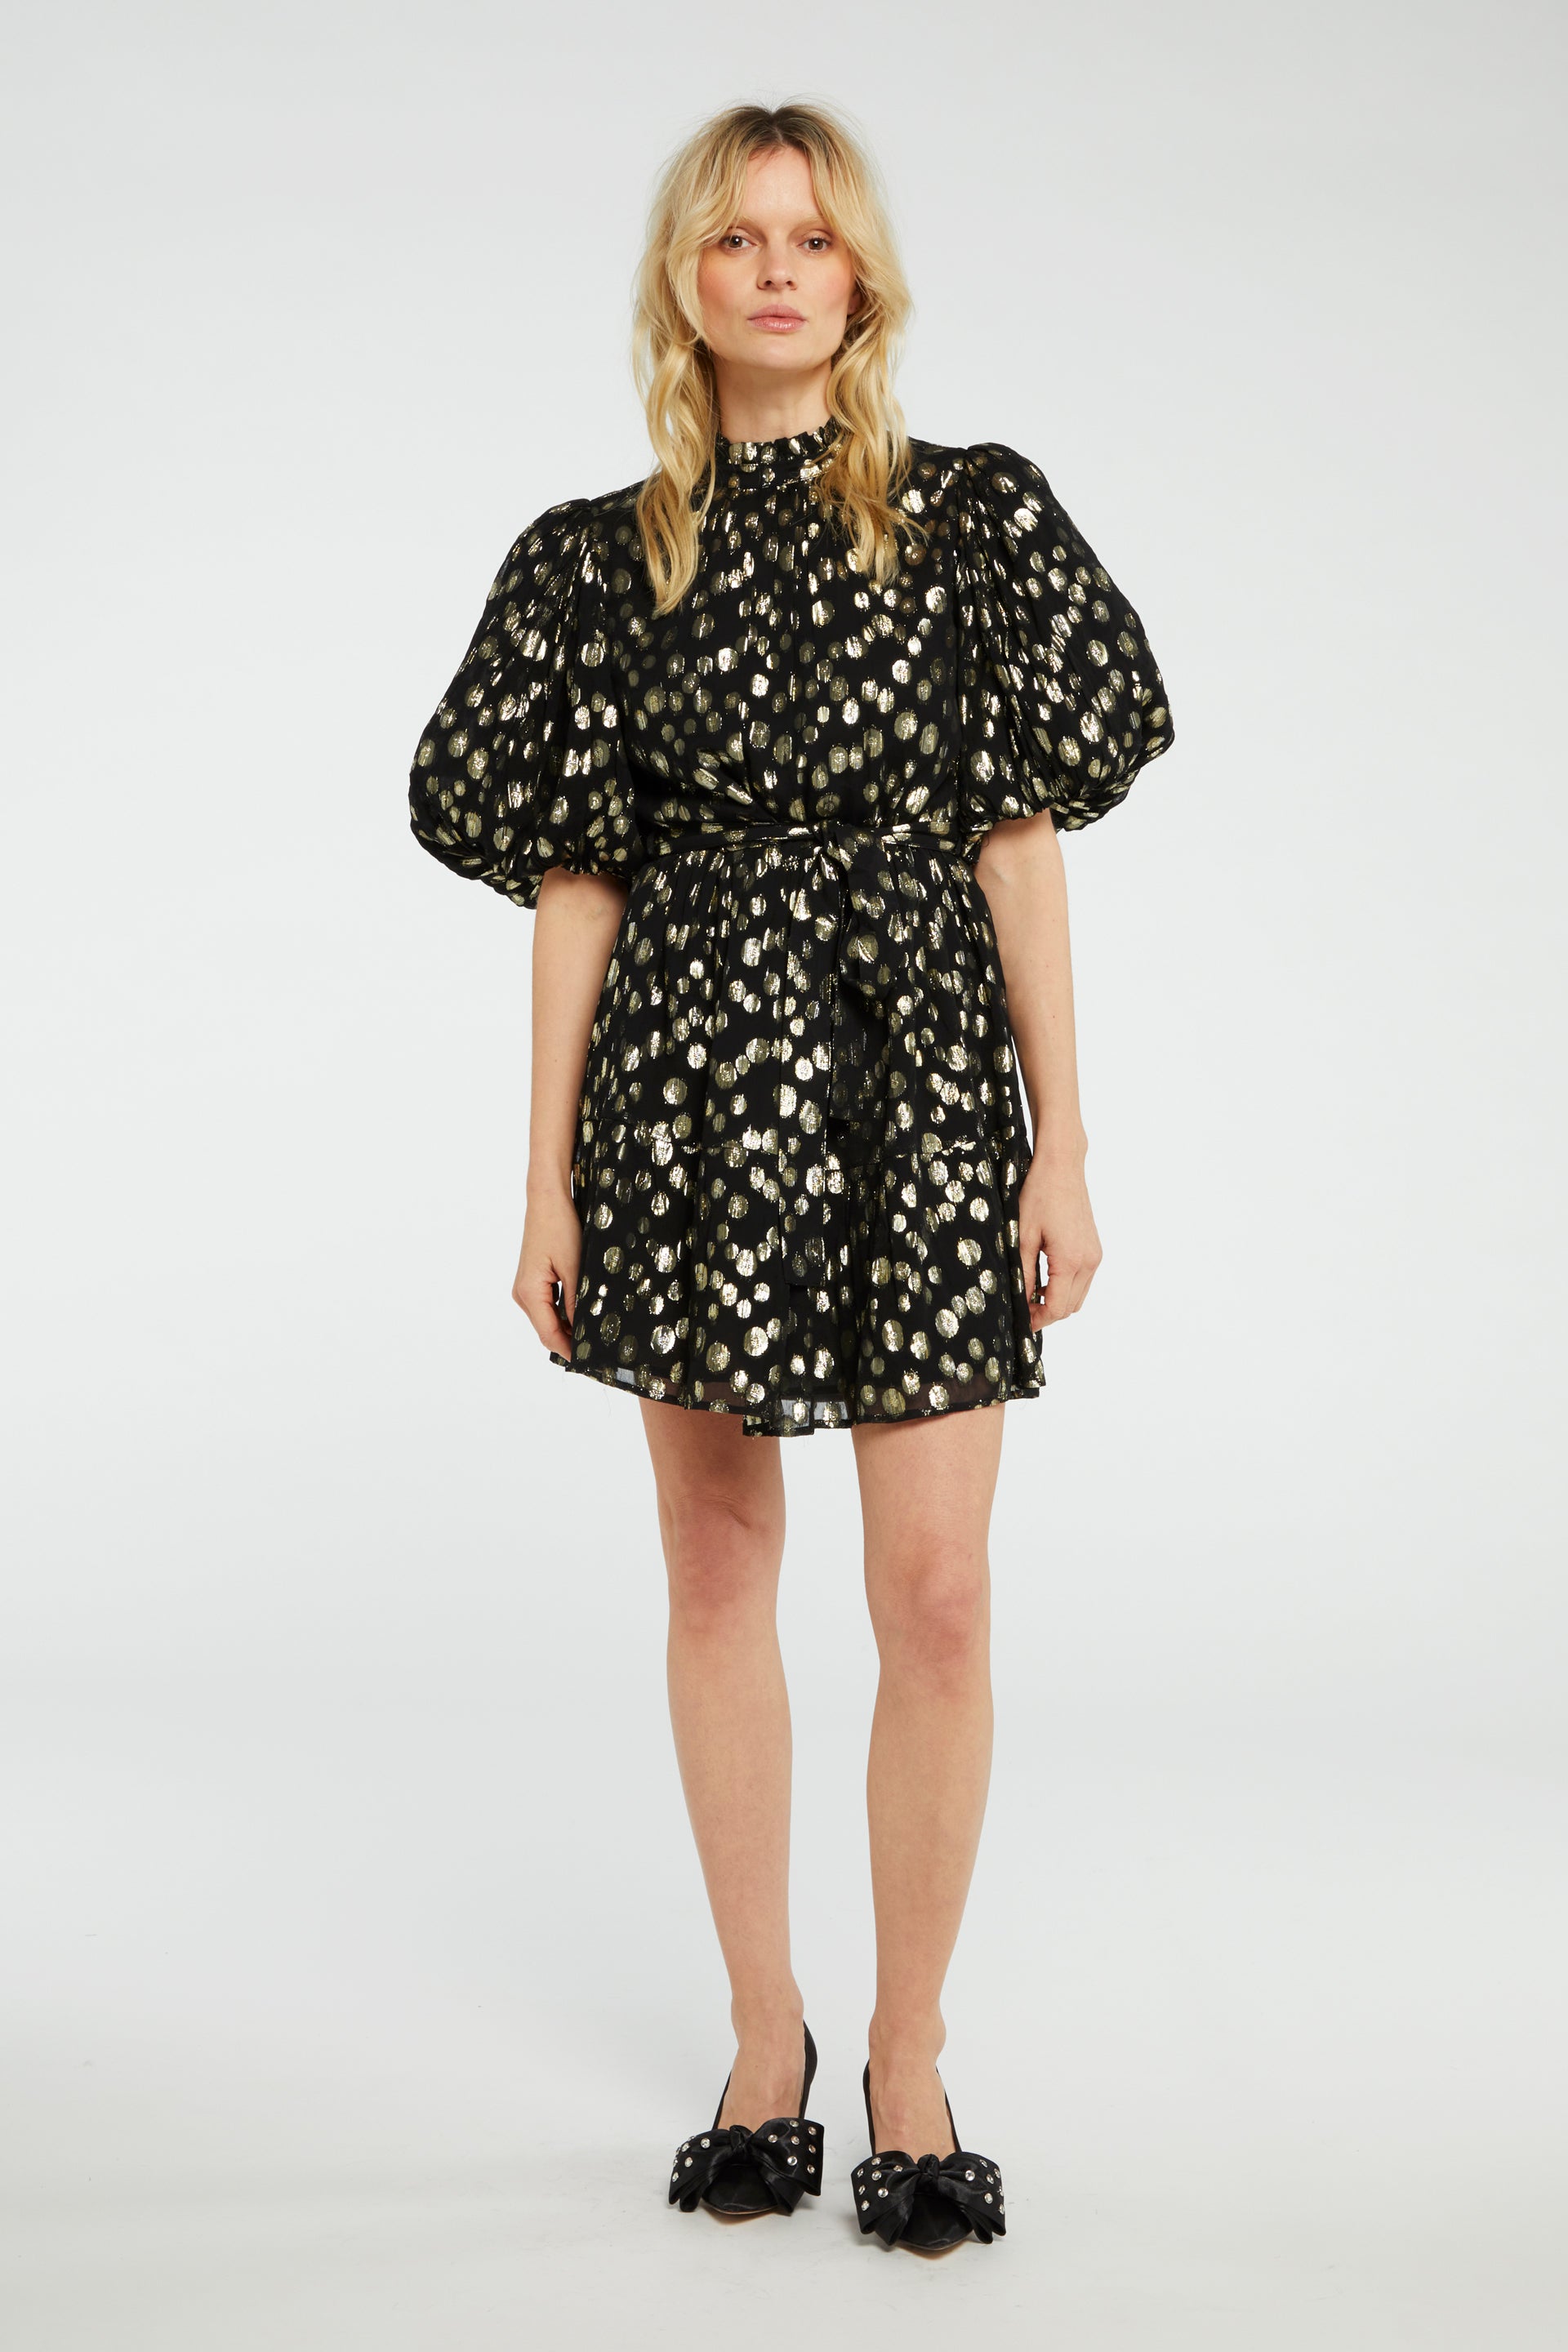 The model is wearing a Roxy Dress - Black & Gold by Fabienne Chapot with a floral print.